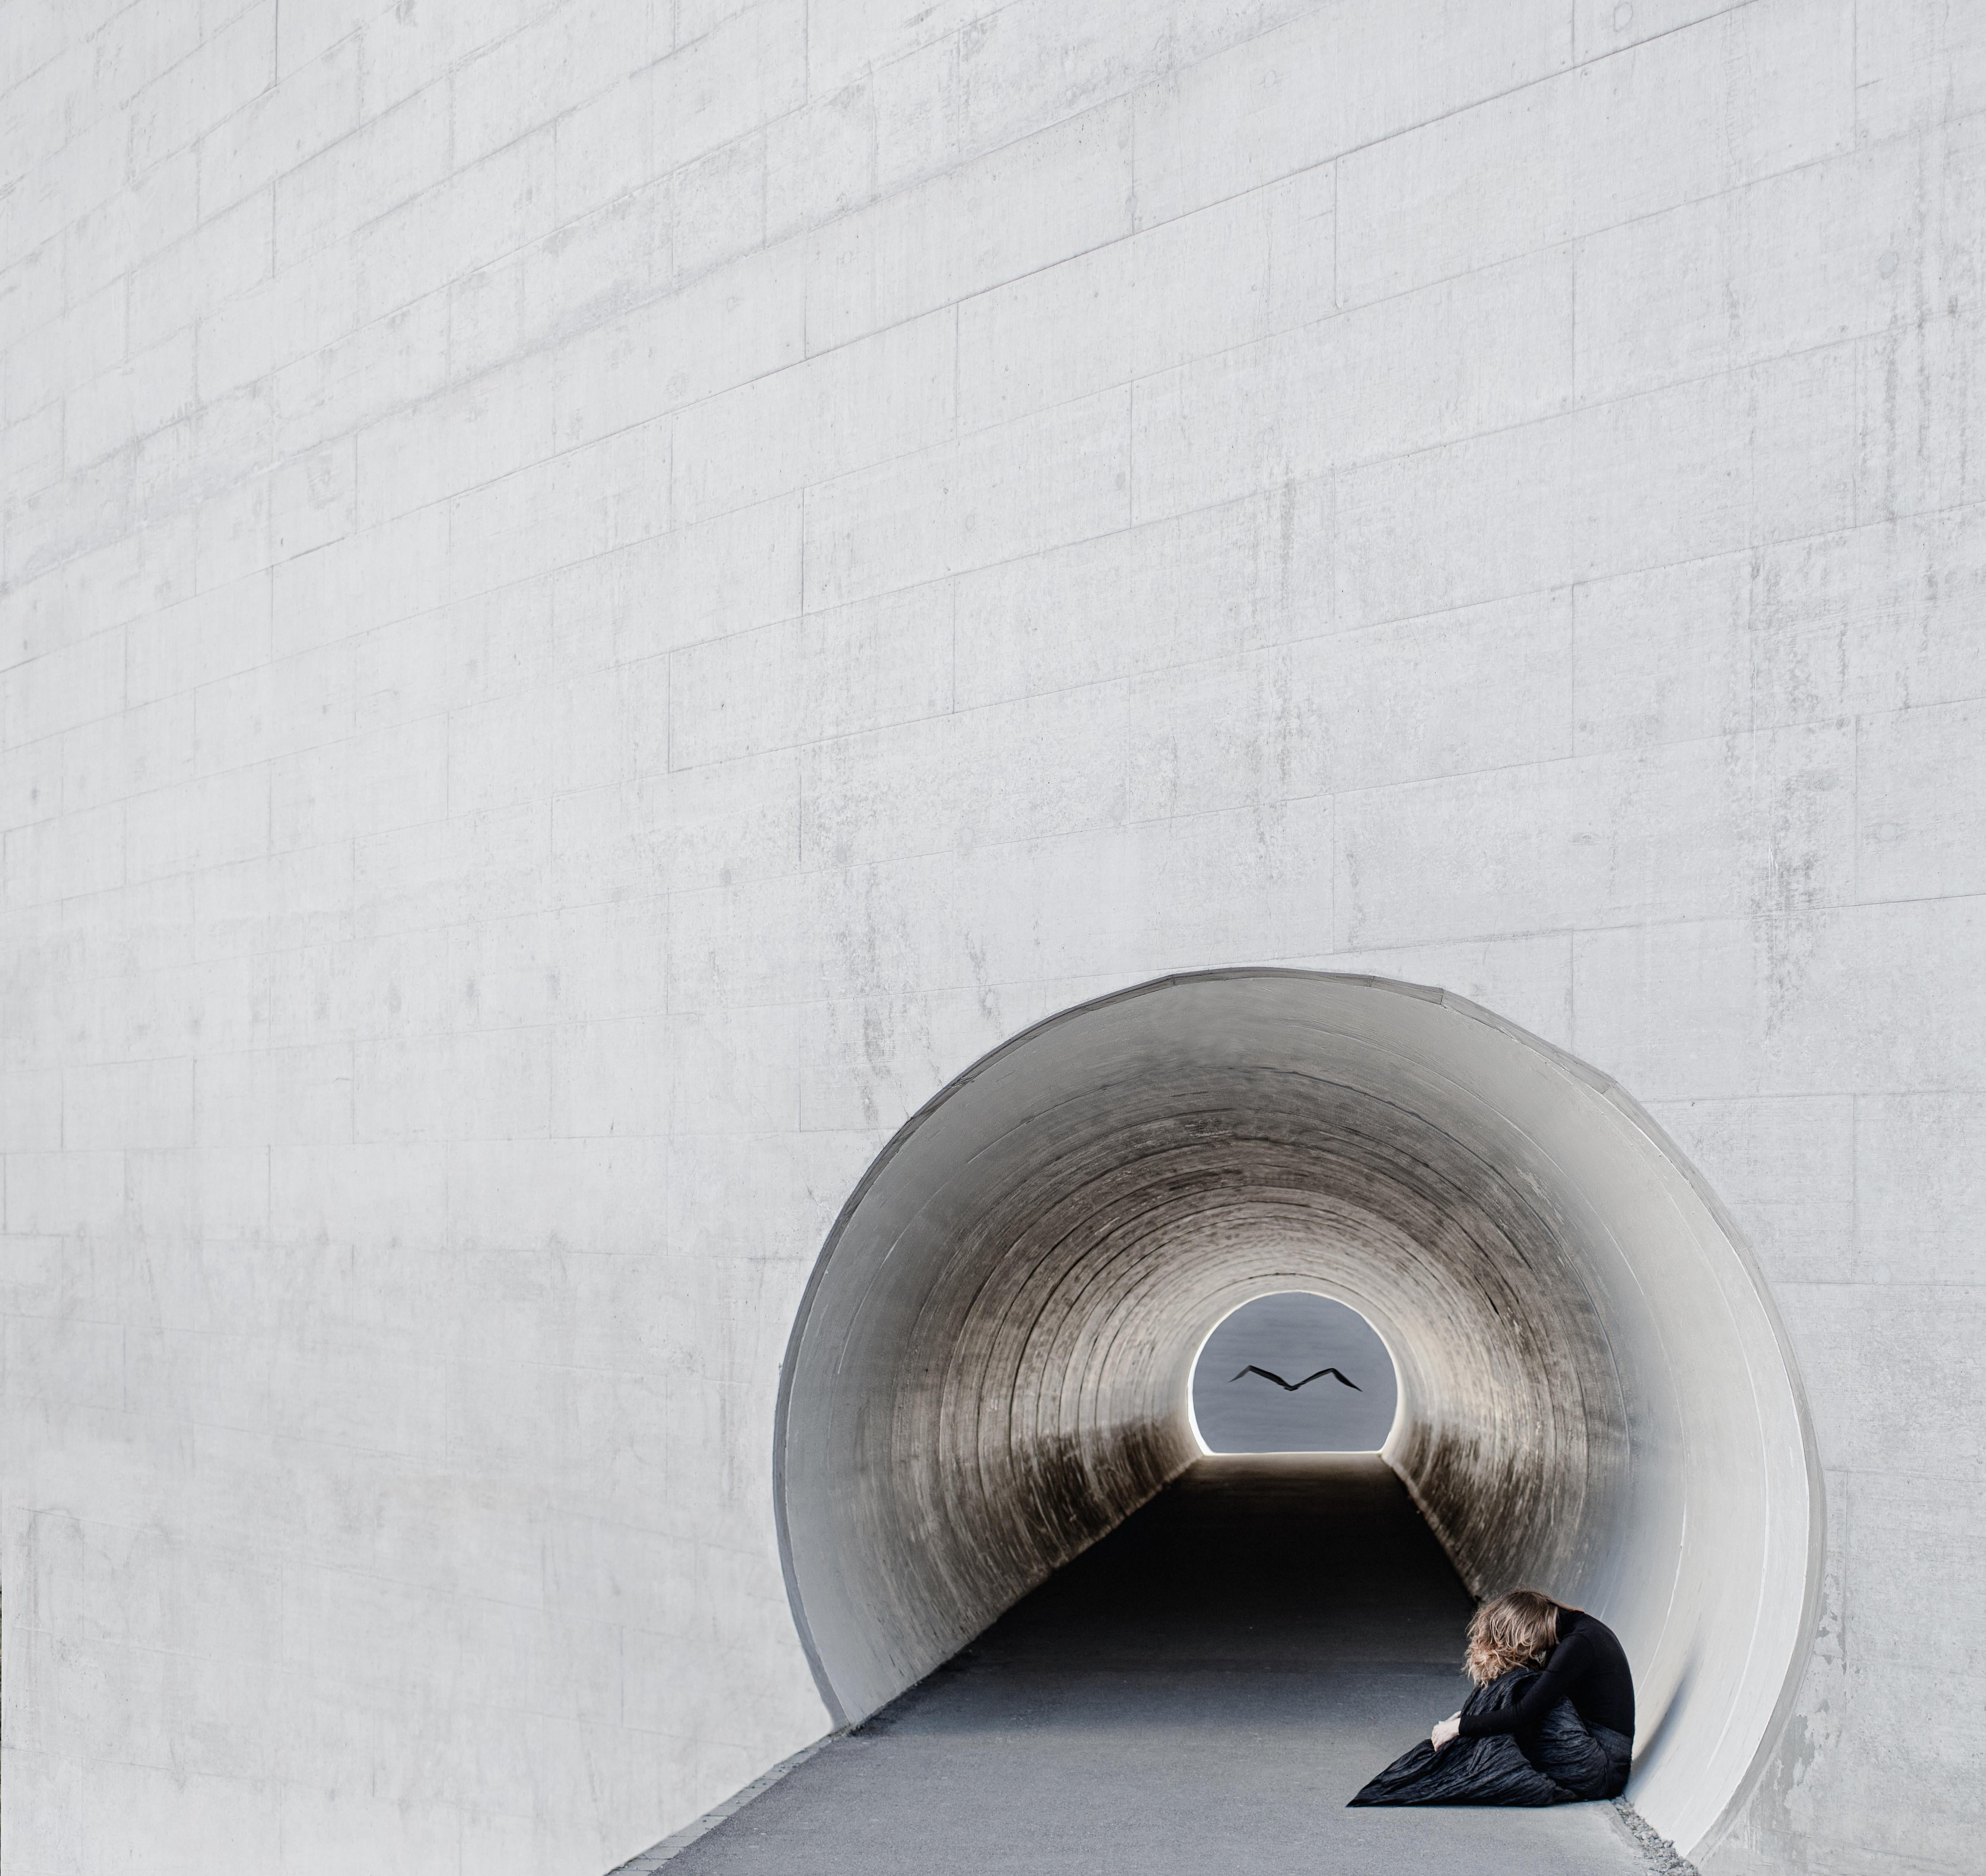 There is always light at the end of a tunnel. Here, a woman struggles to find the light. An origami bird in the distance creates hope in this minimalist and clean composition. This is a limited edition color photograph. Number 1 of 18 is currently